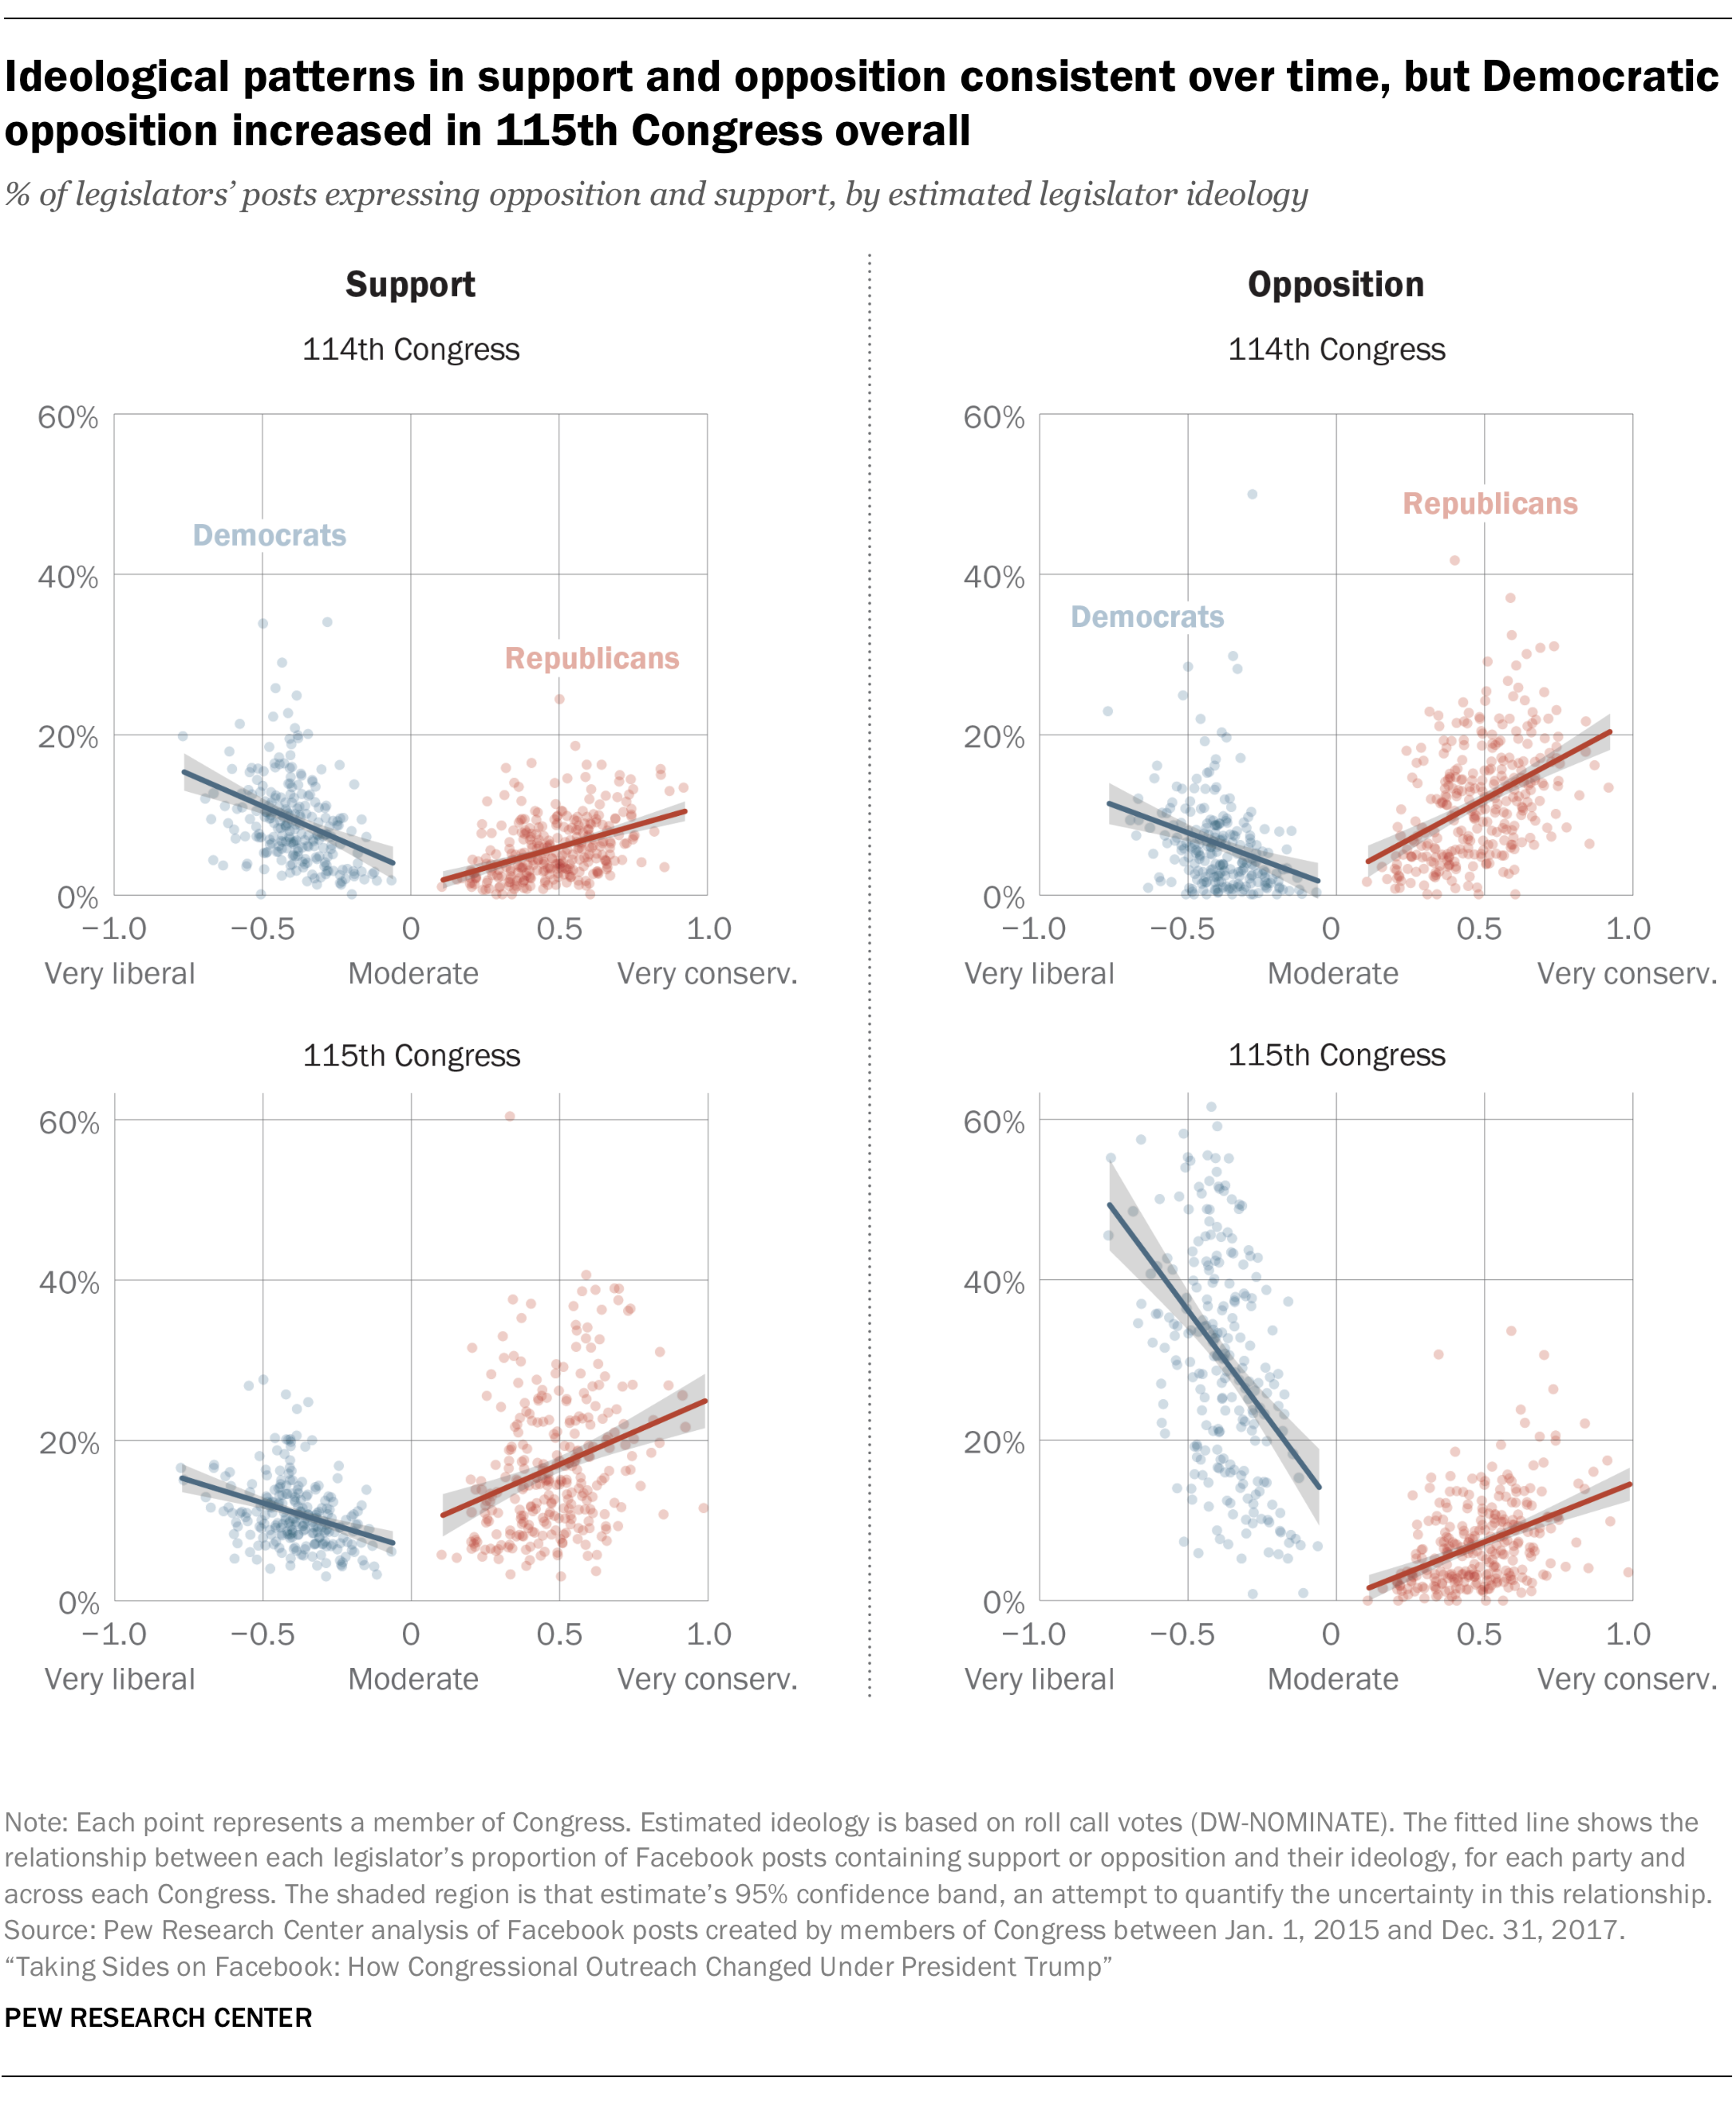 Ideological patterns in support and opposition consistent over time, but Democratic opposition increased in 115th Congress overall